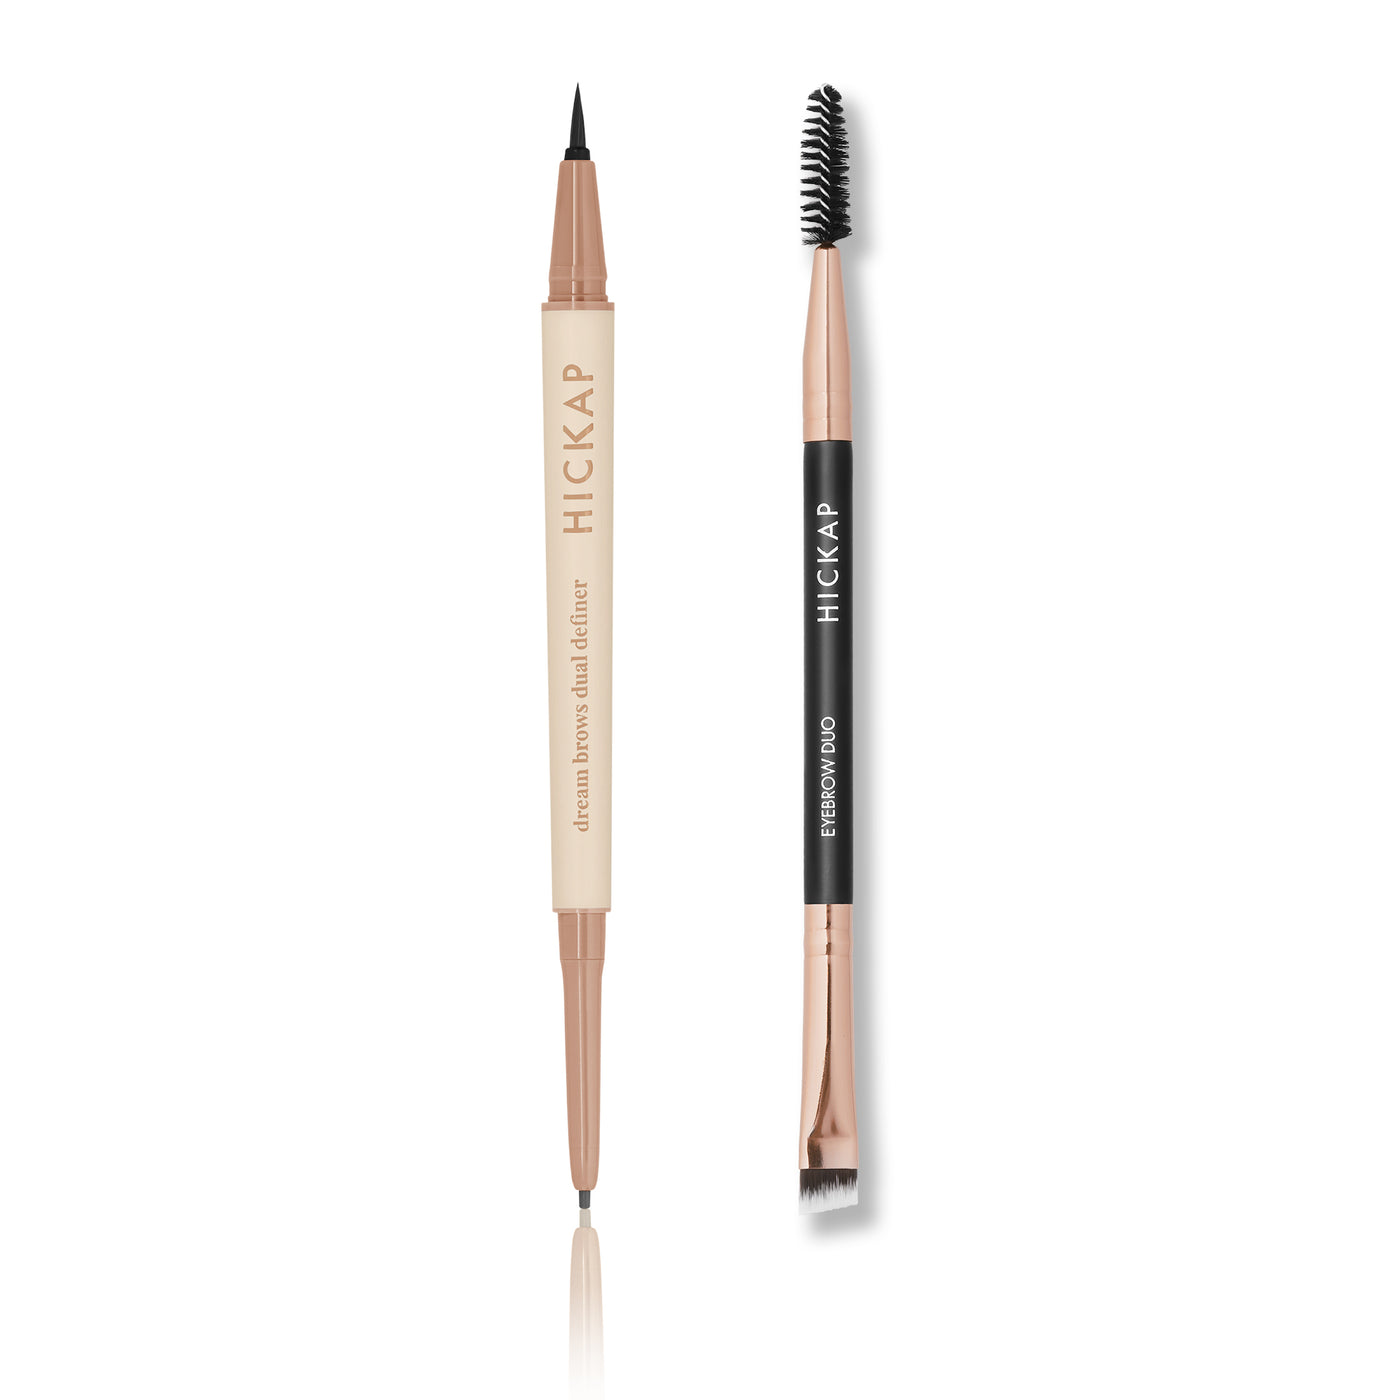 Dream Brows + Eye Brow Duo